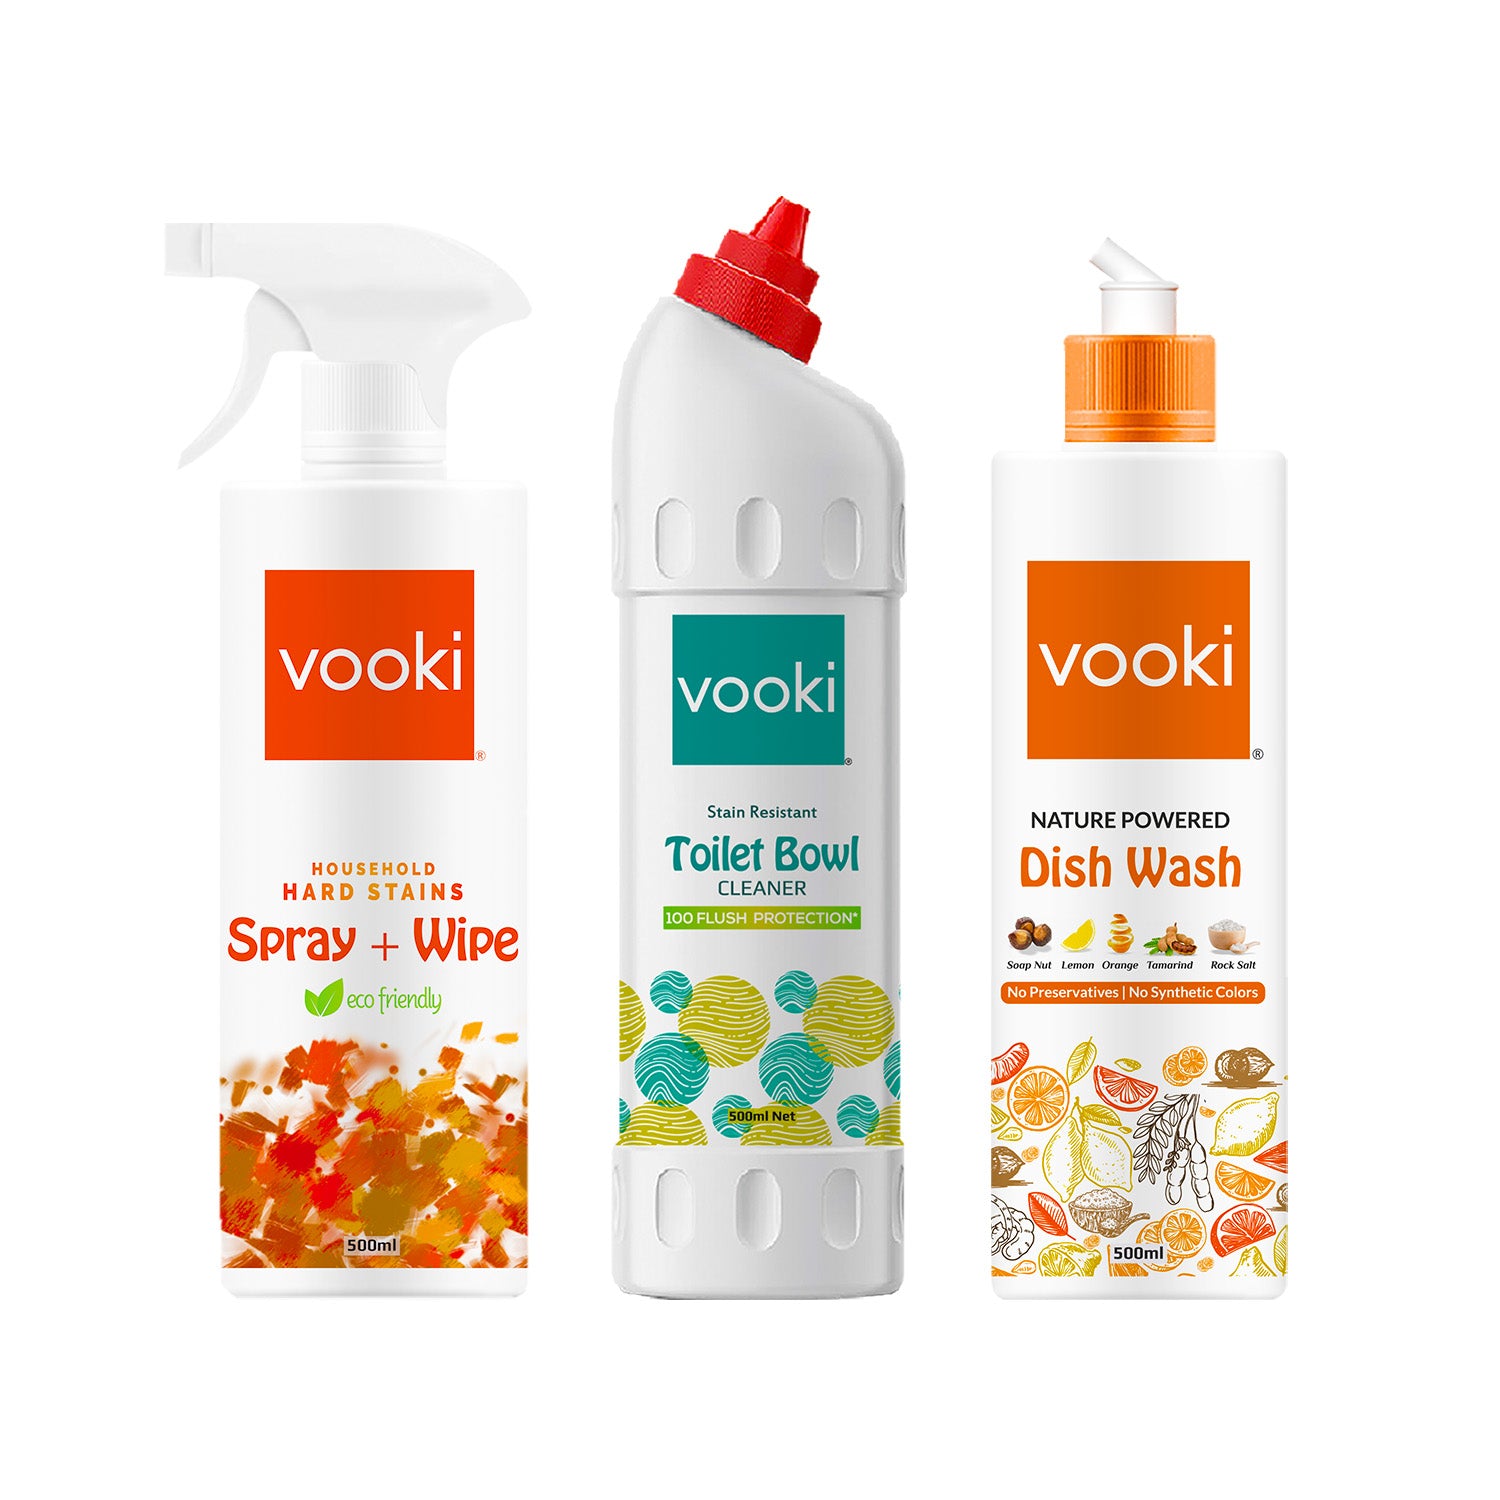 All-natural cleaning solutions by vooki, a brand for eco-conscious consumers